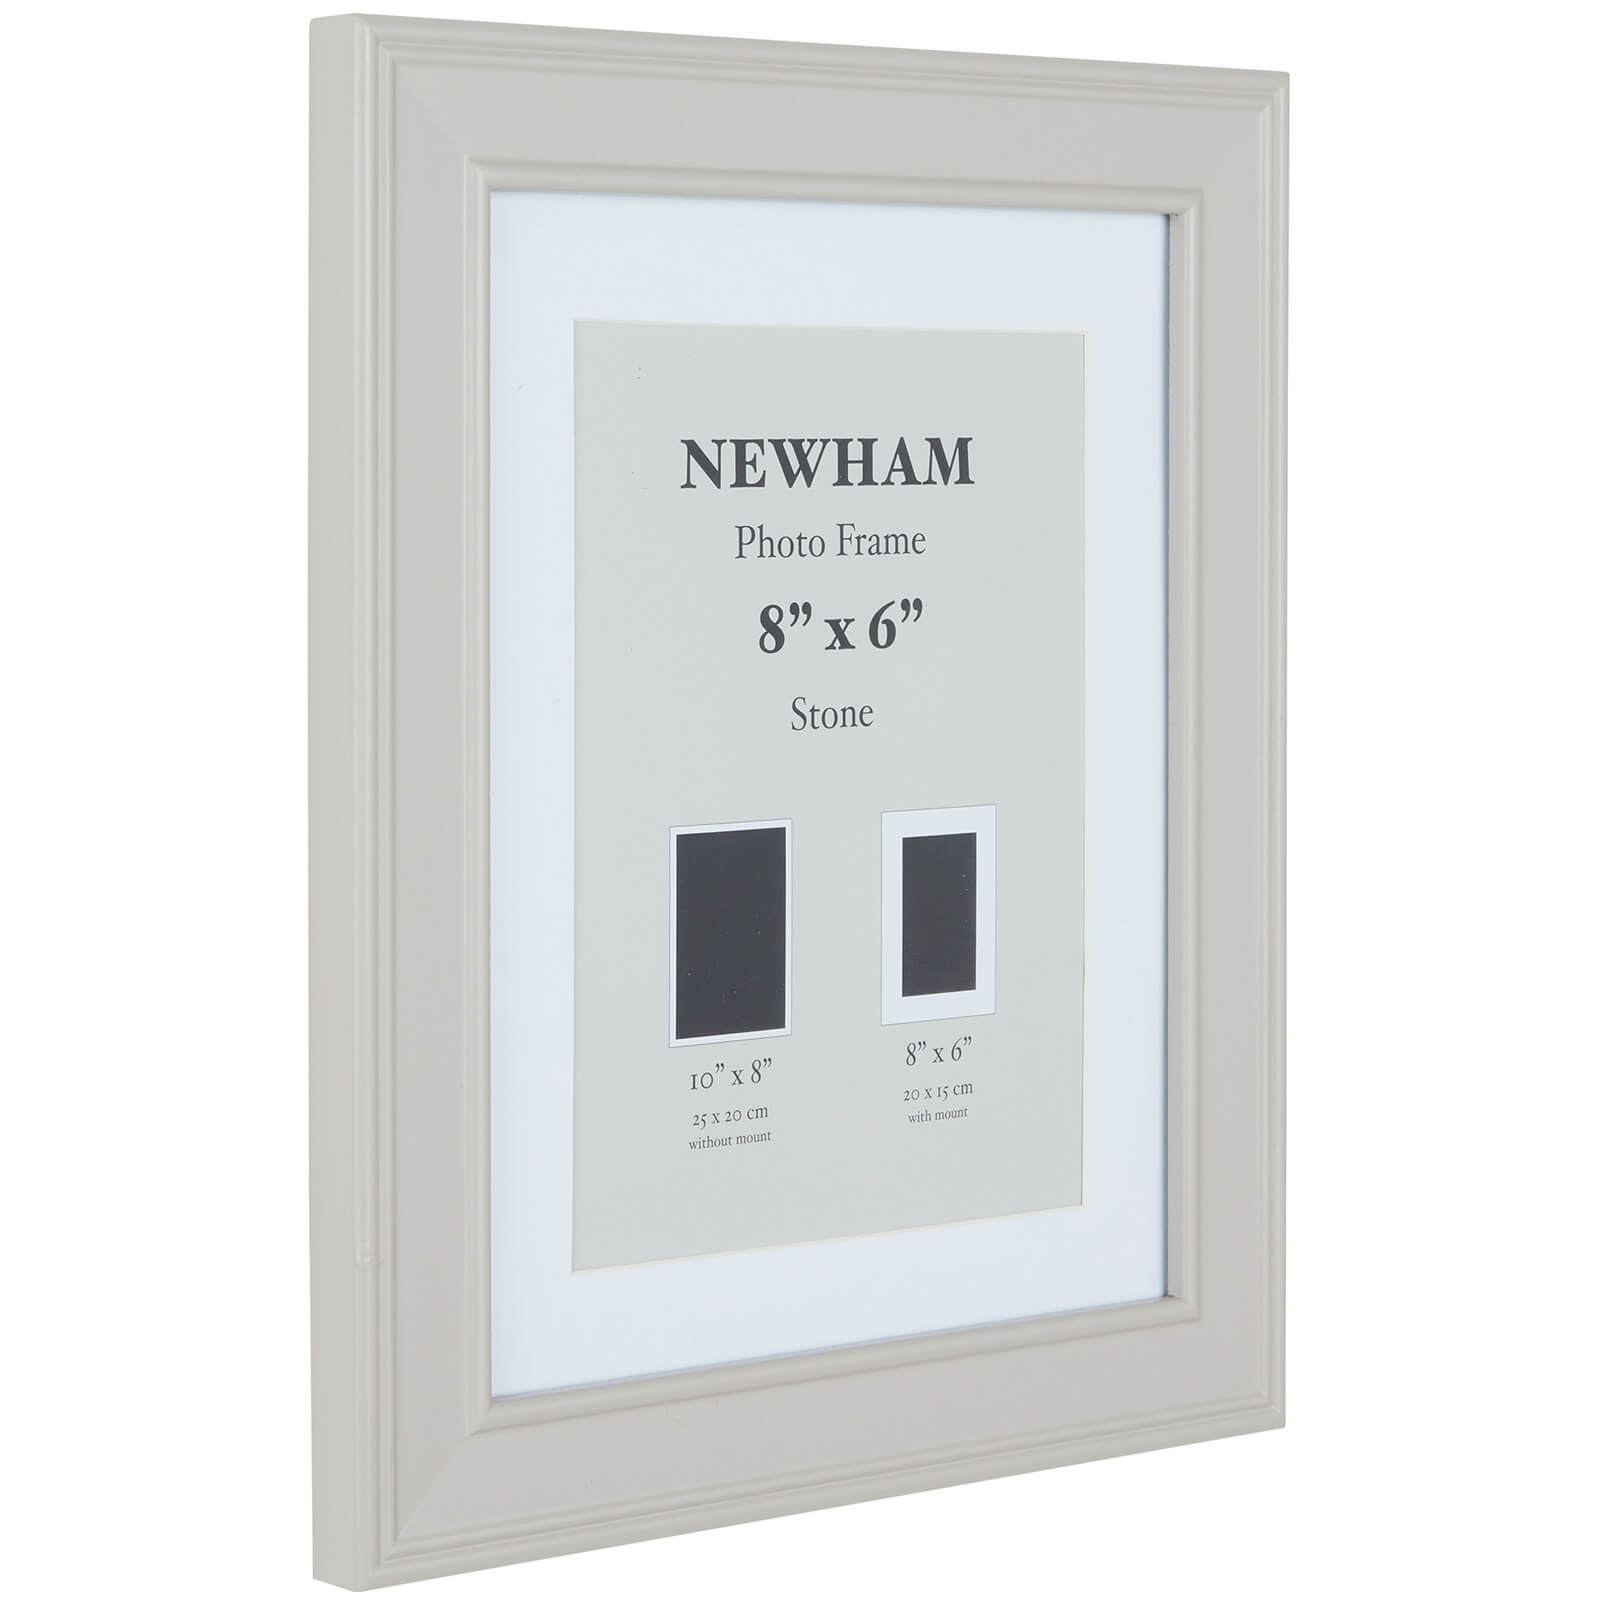 Newham Picture Frame 8 x 6 - Stone